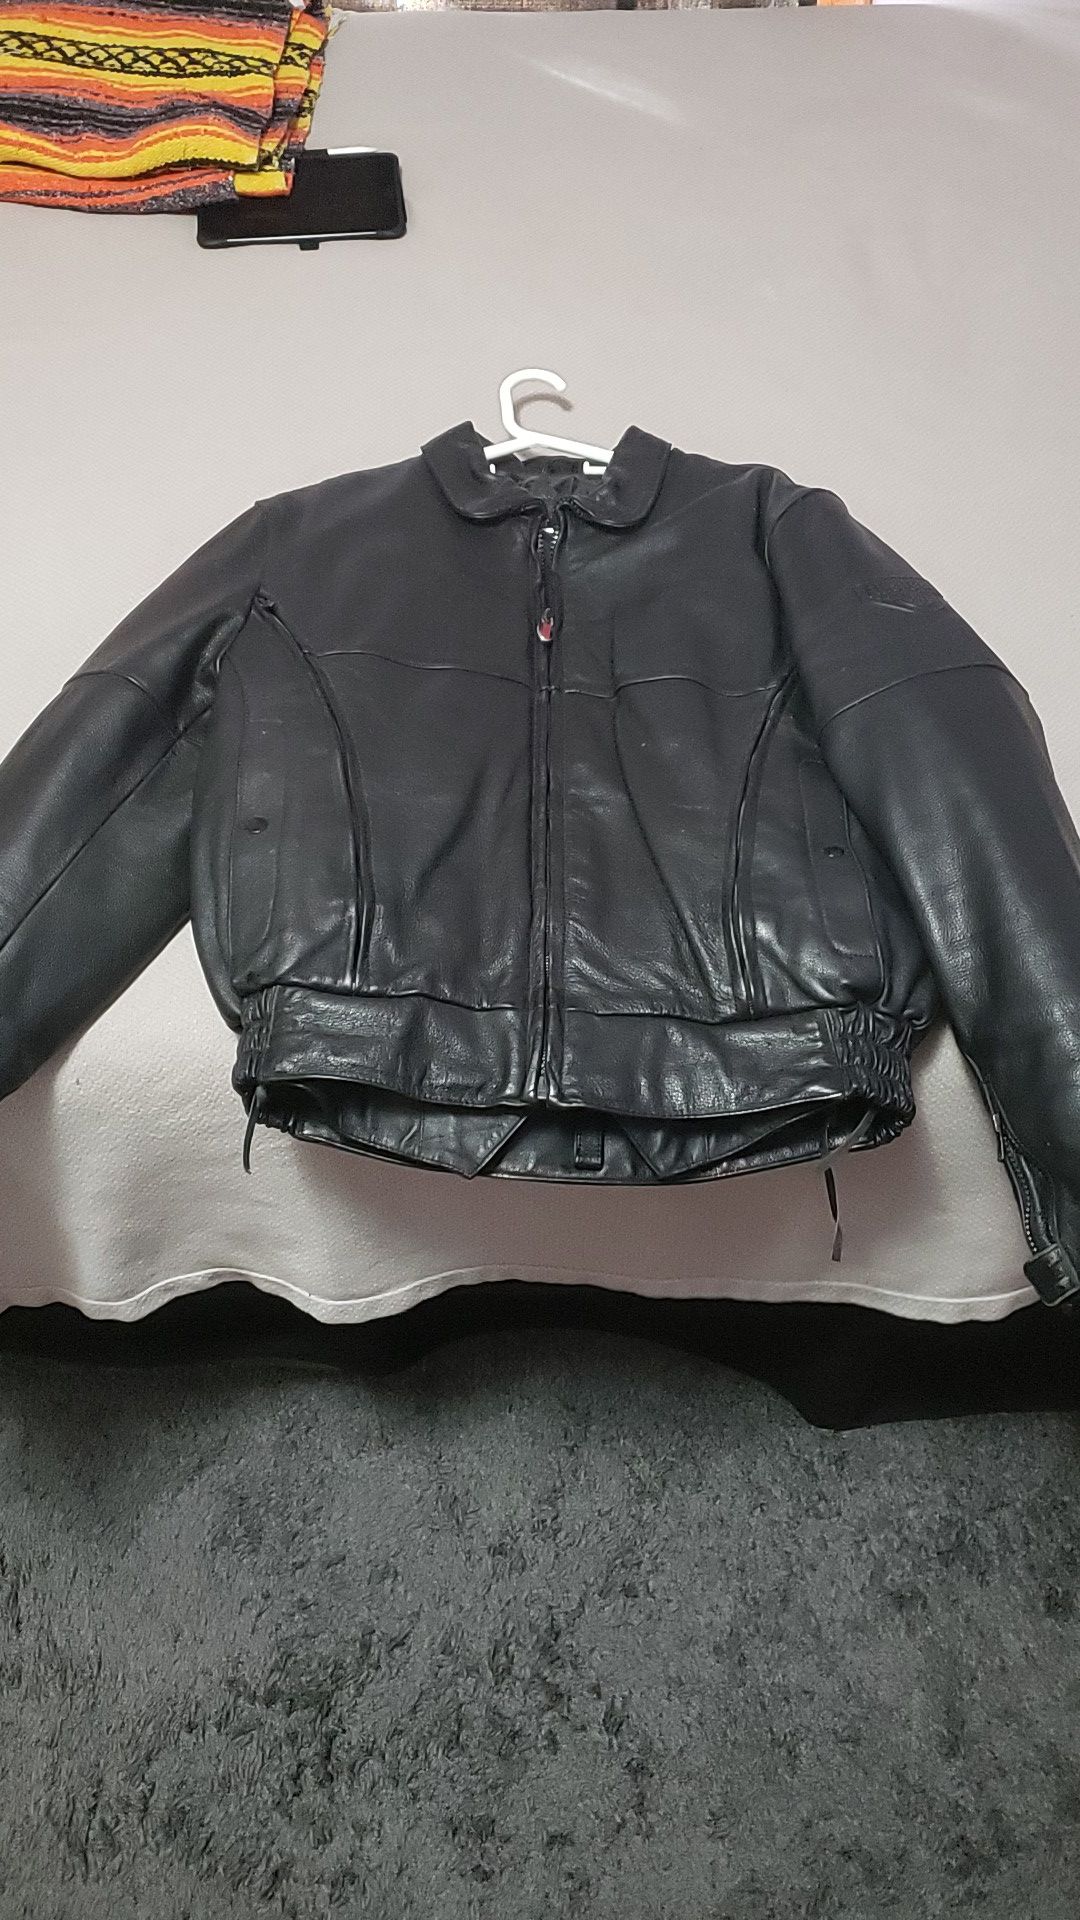 First gear motorcycle jacket (M)